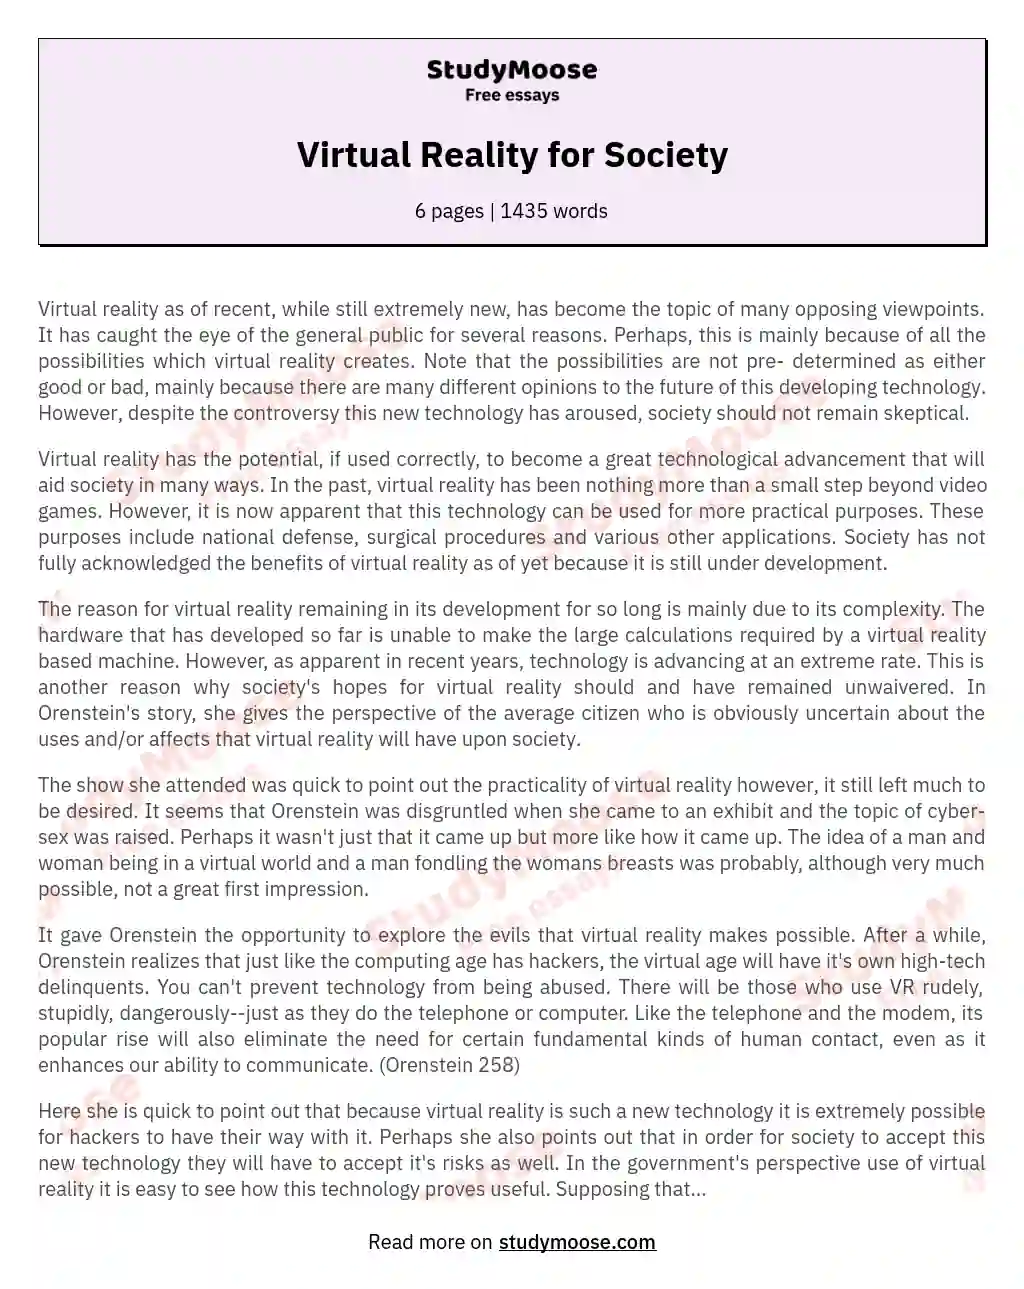 essay titles about virtual reality